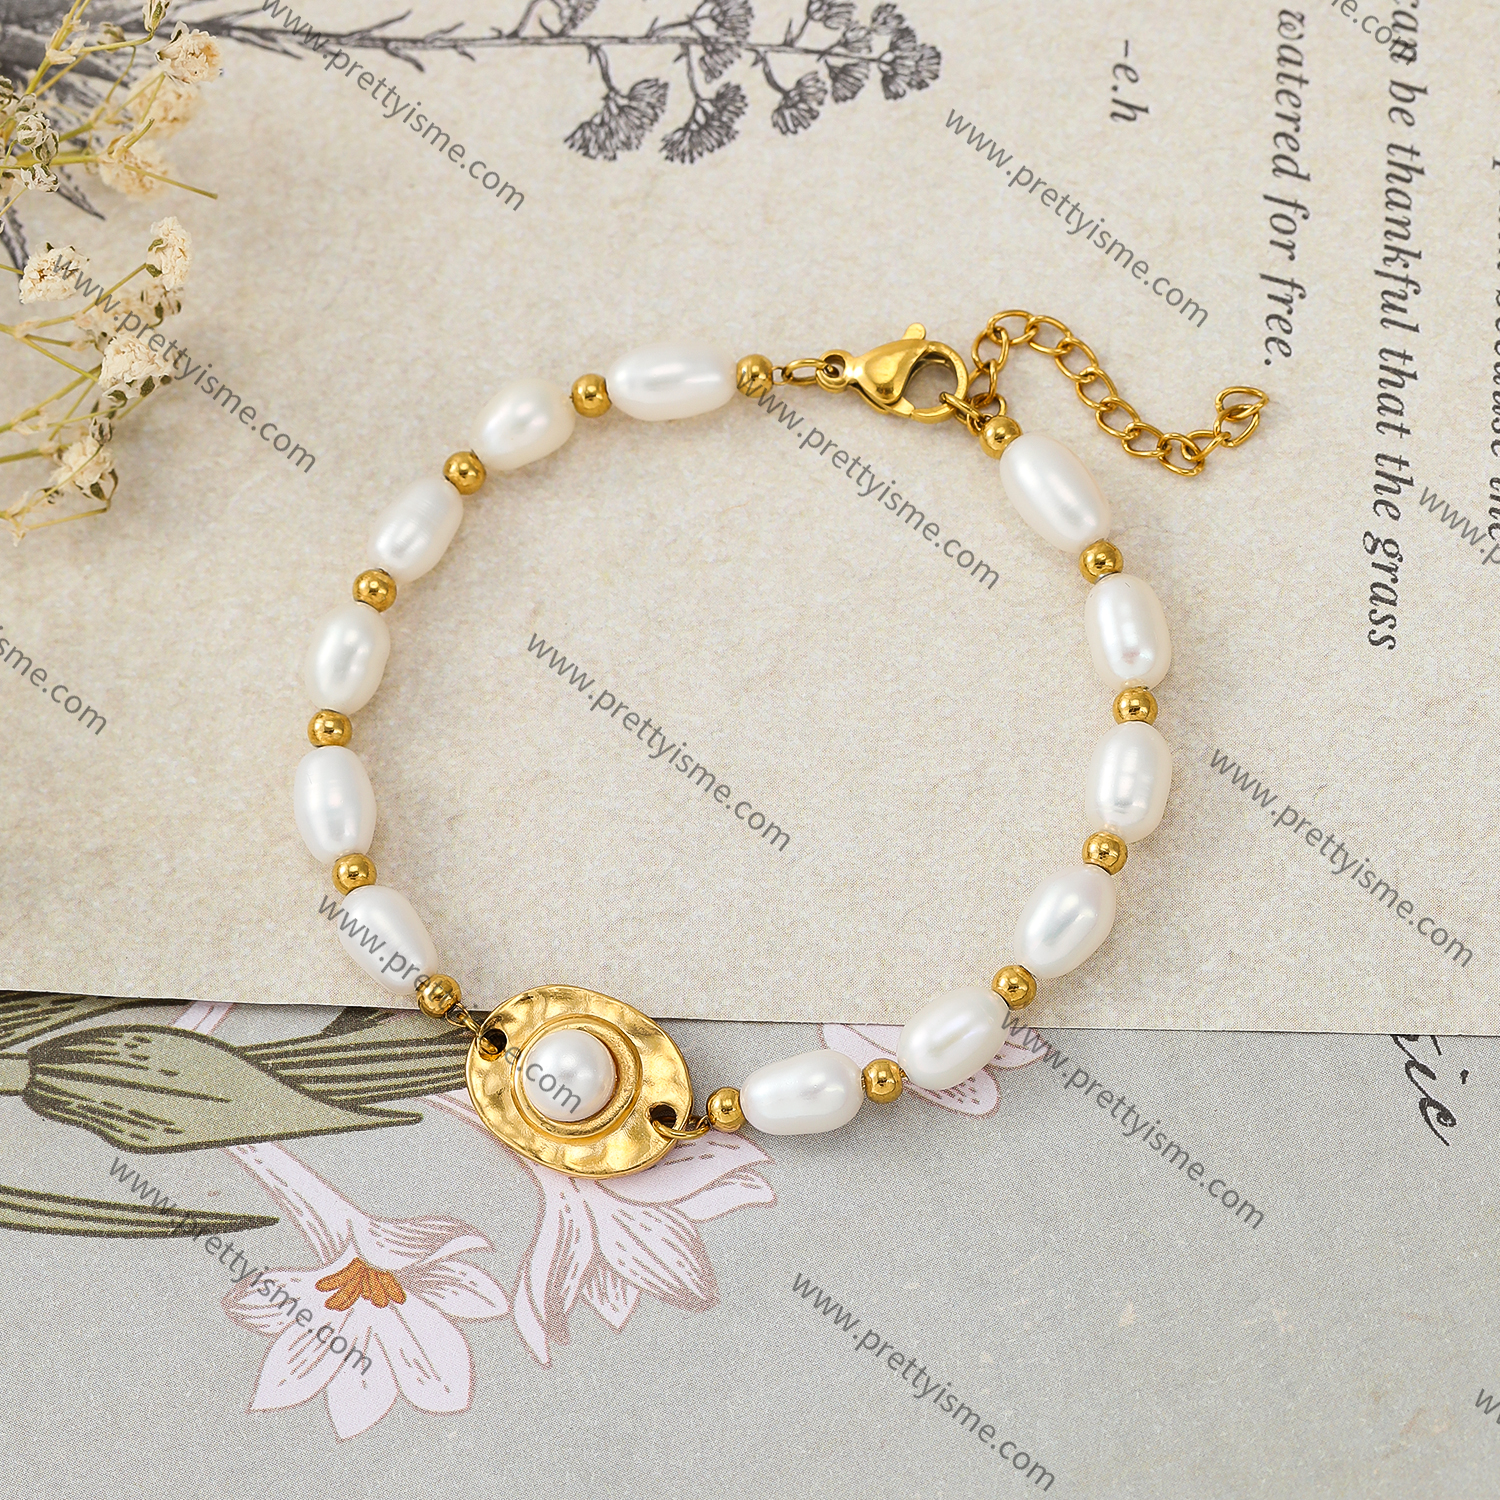 Pearl Bracelet Gold Plated 18K Gentle Delicate Bracelet with Small Gold Beads (3).webp